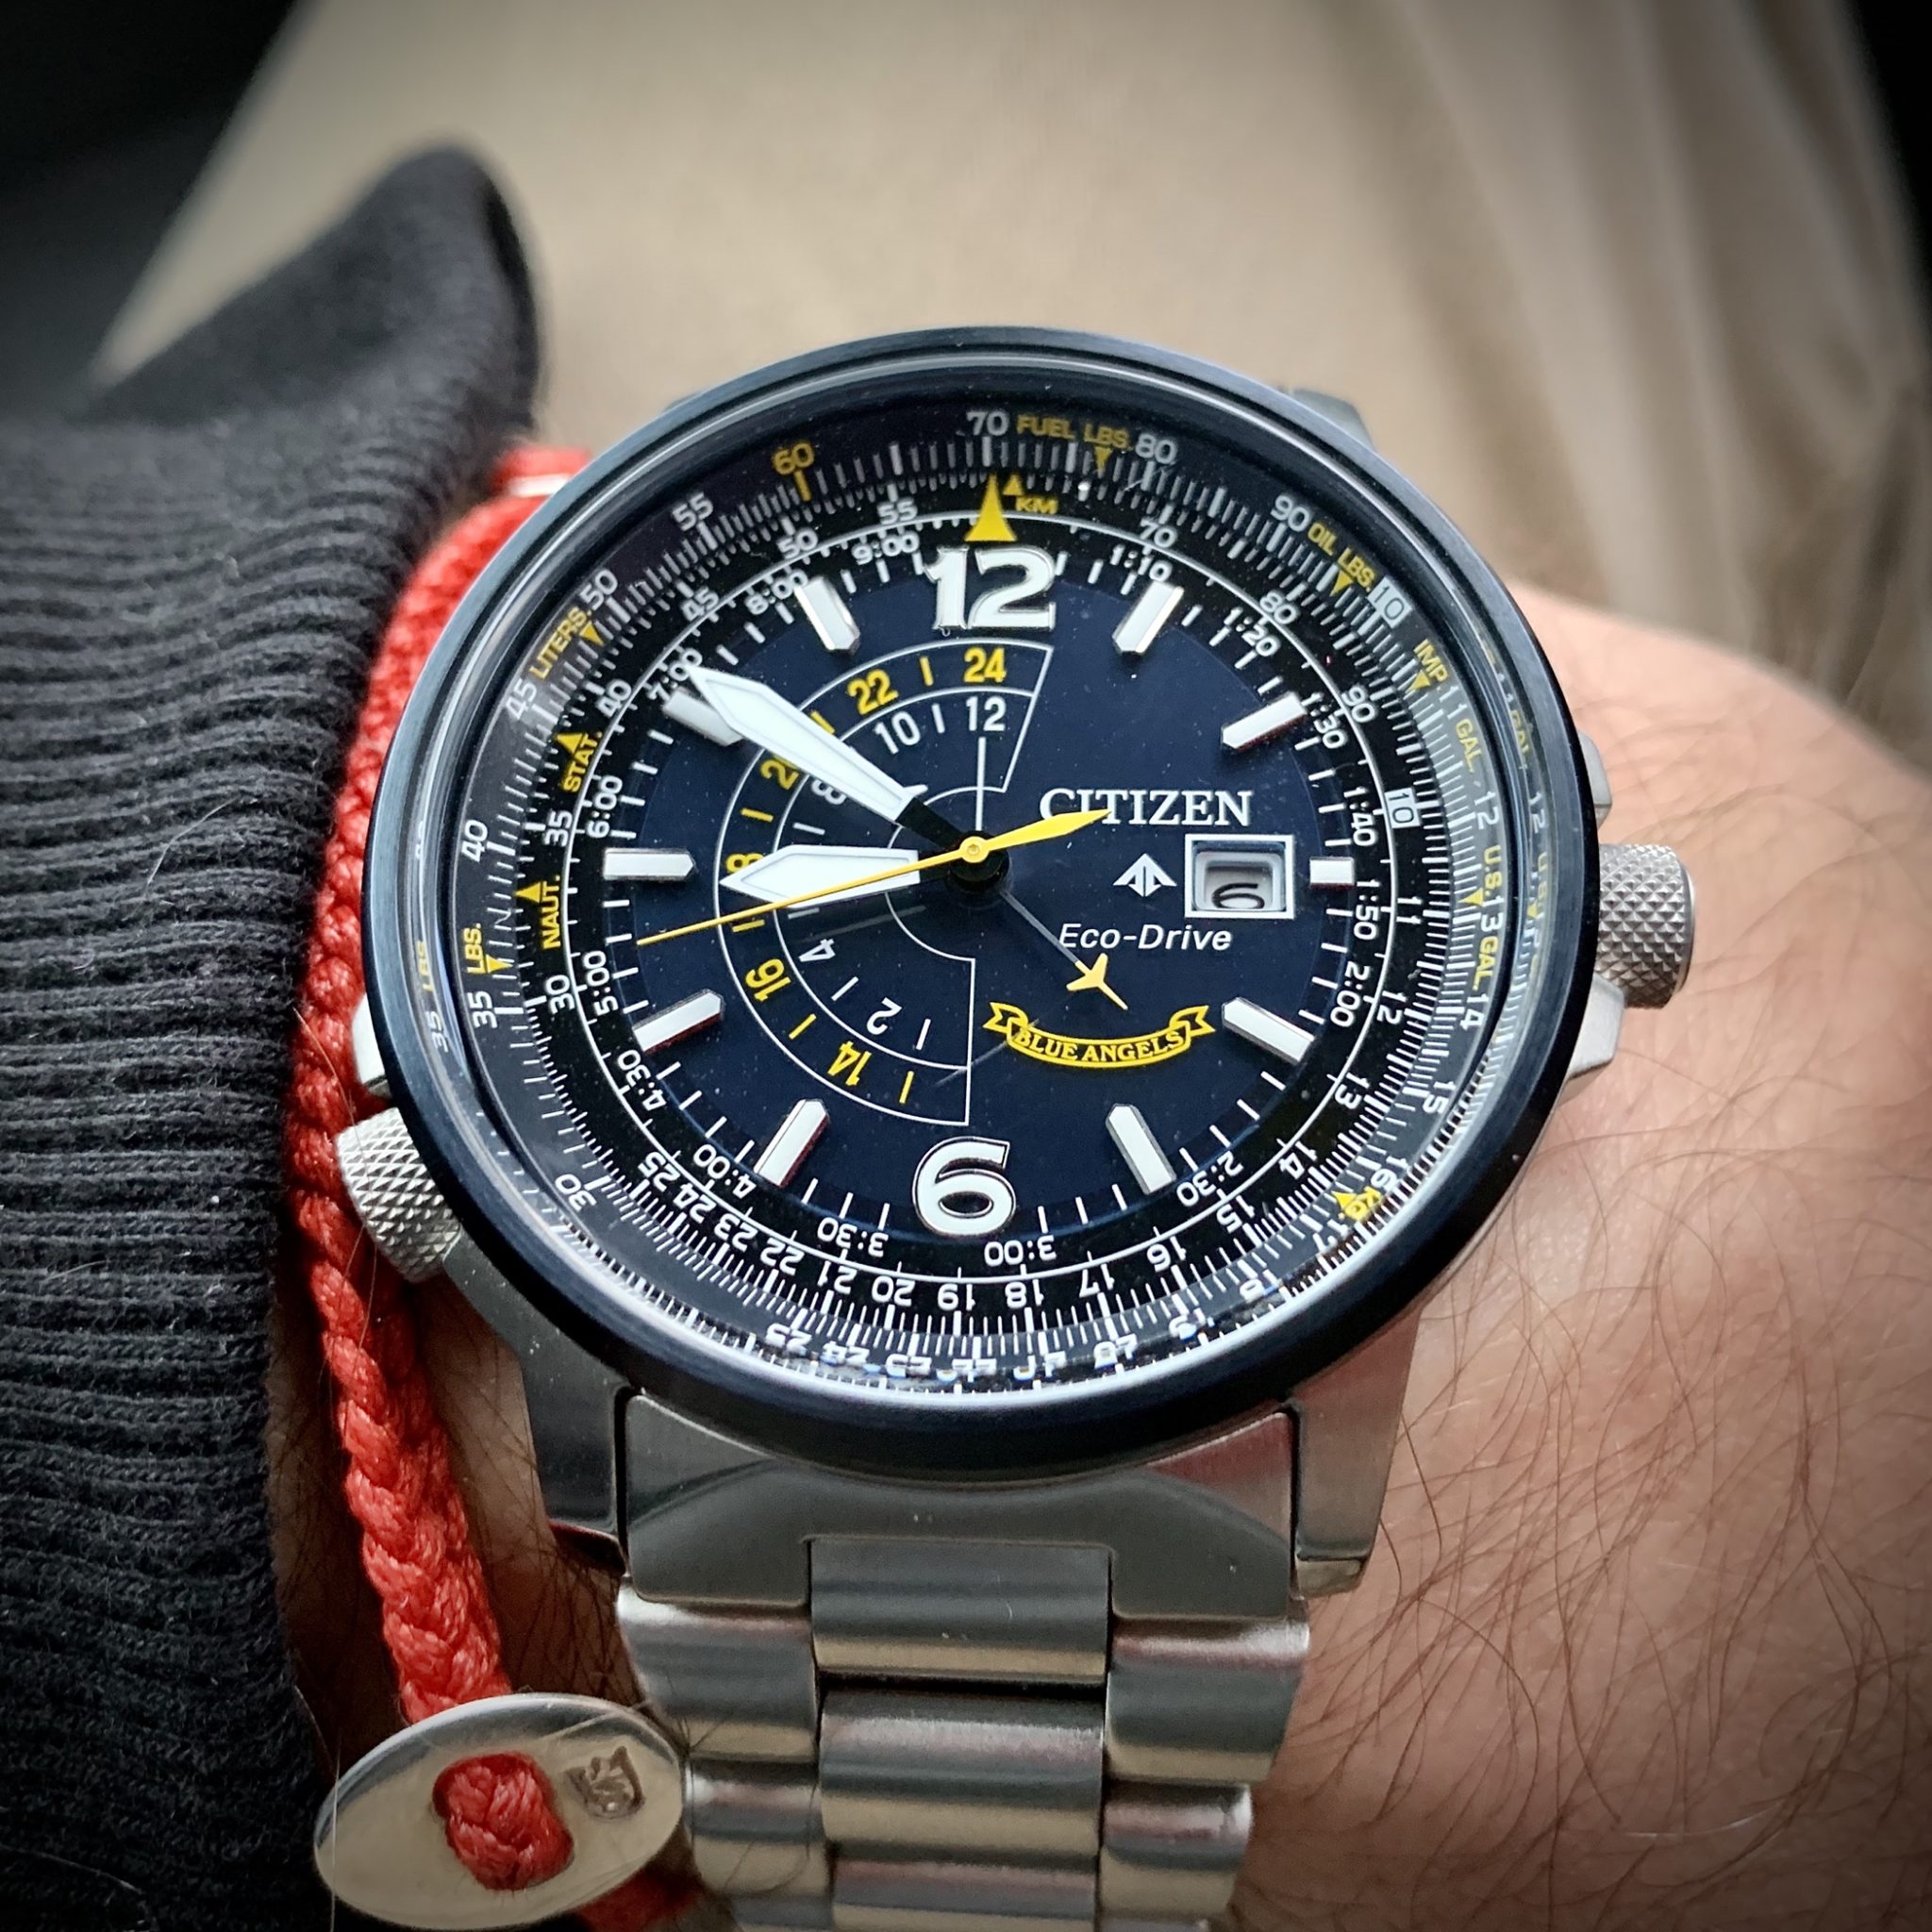 The complicated face of the Citizen Promaster Nighthawk Blue Angels Edition